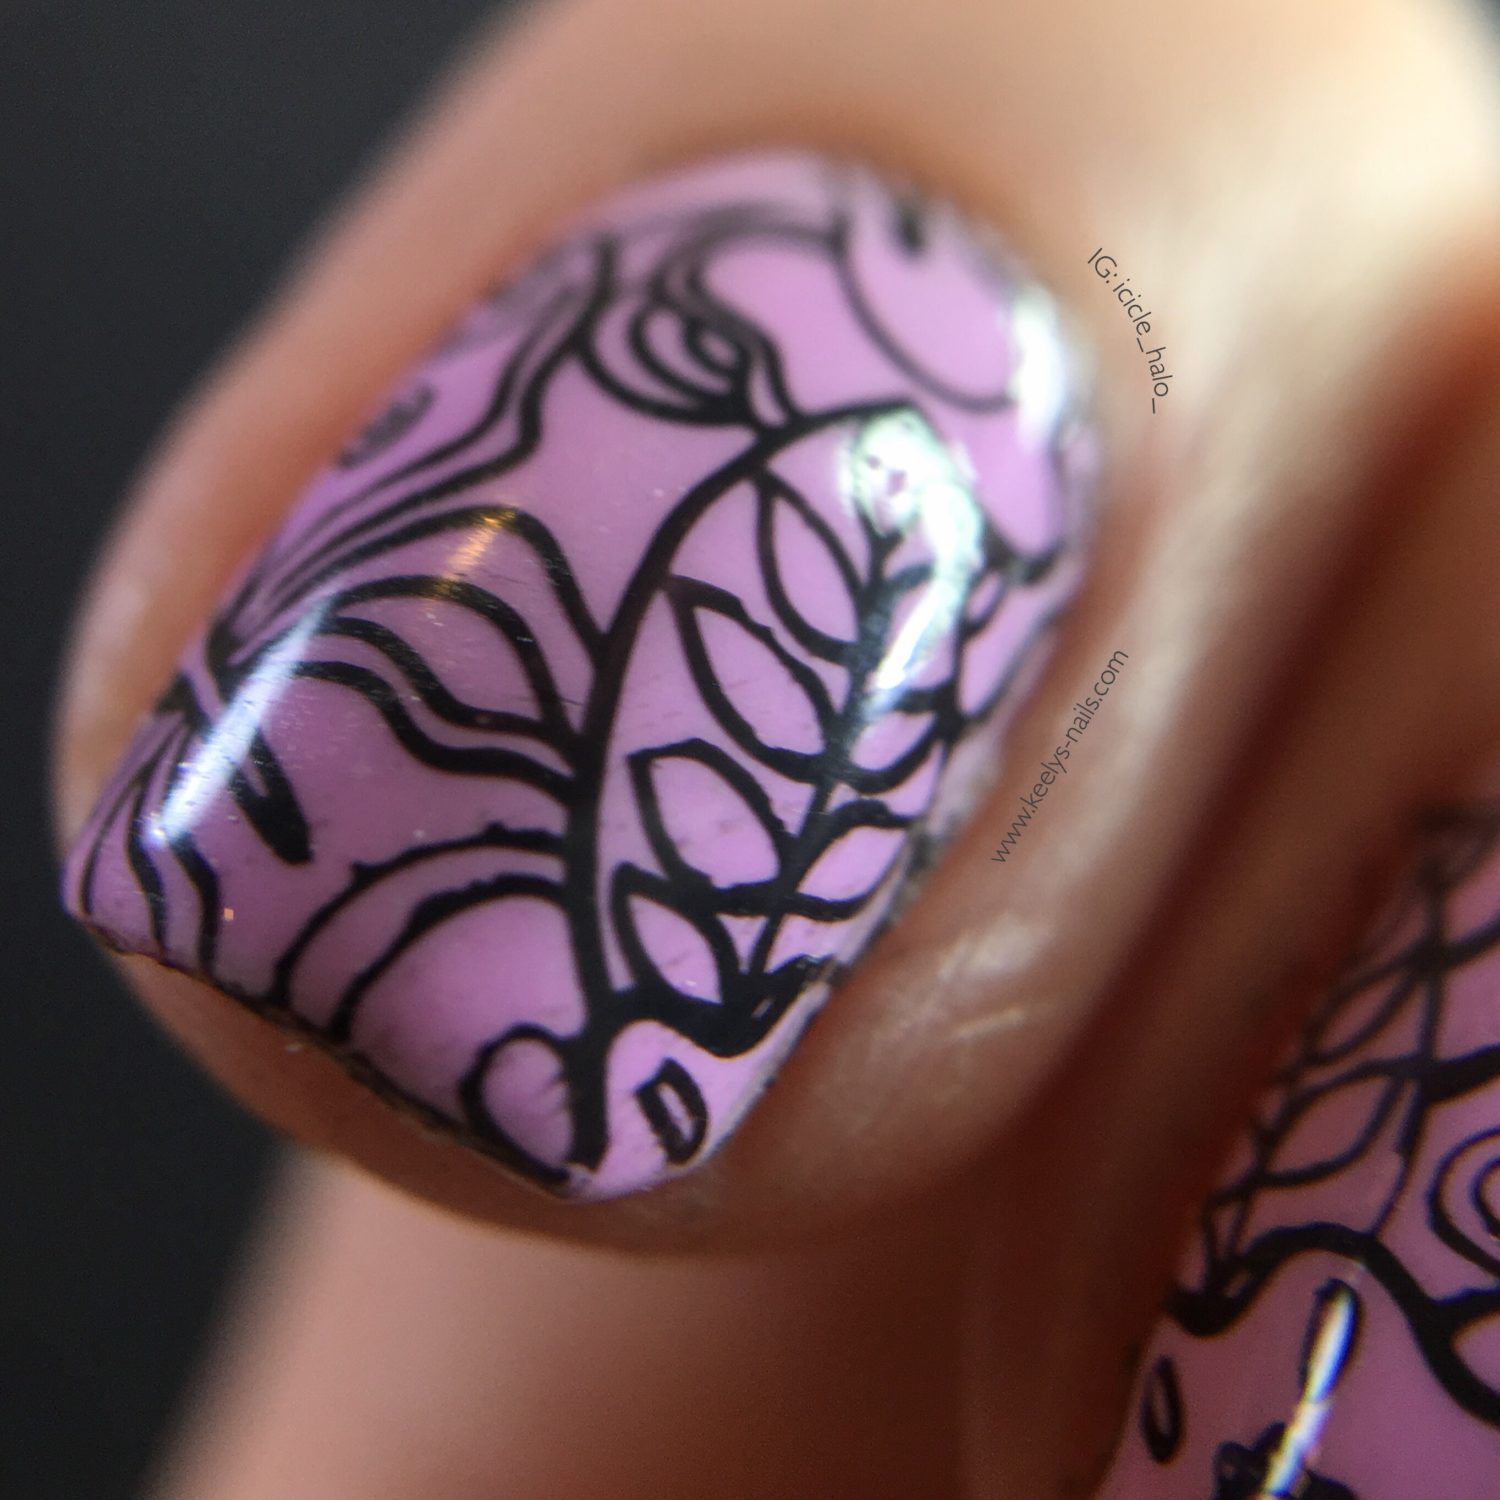 Adult Colouring Book nail art macro index finger | Keely's Nails